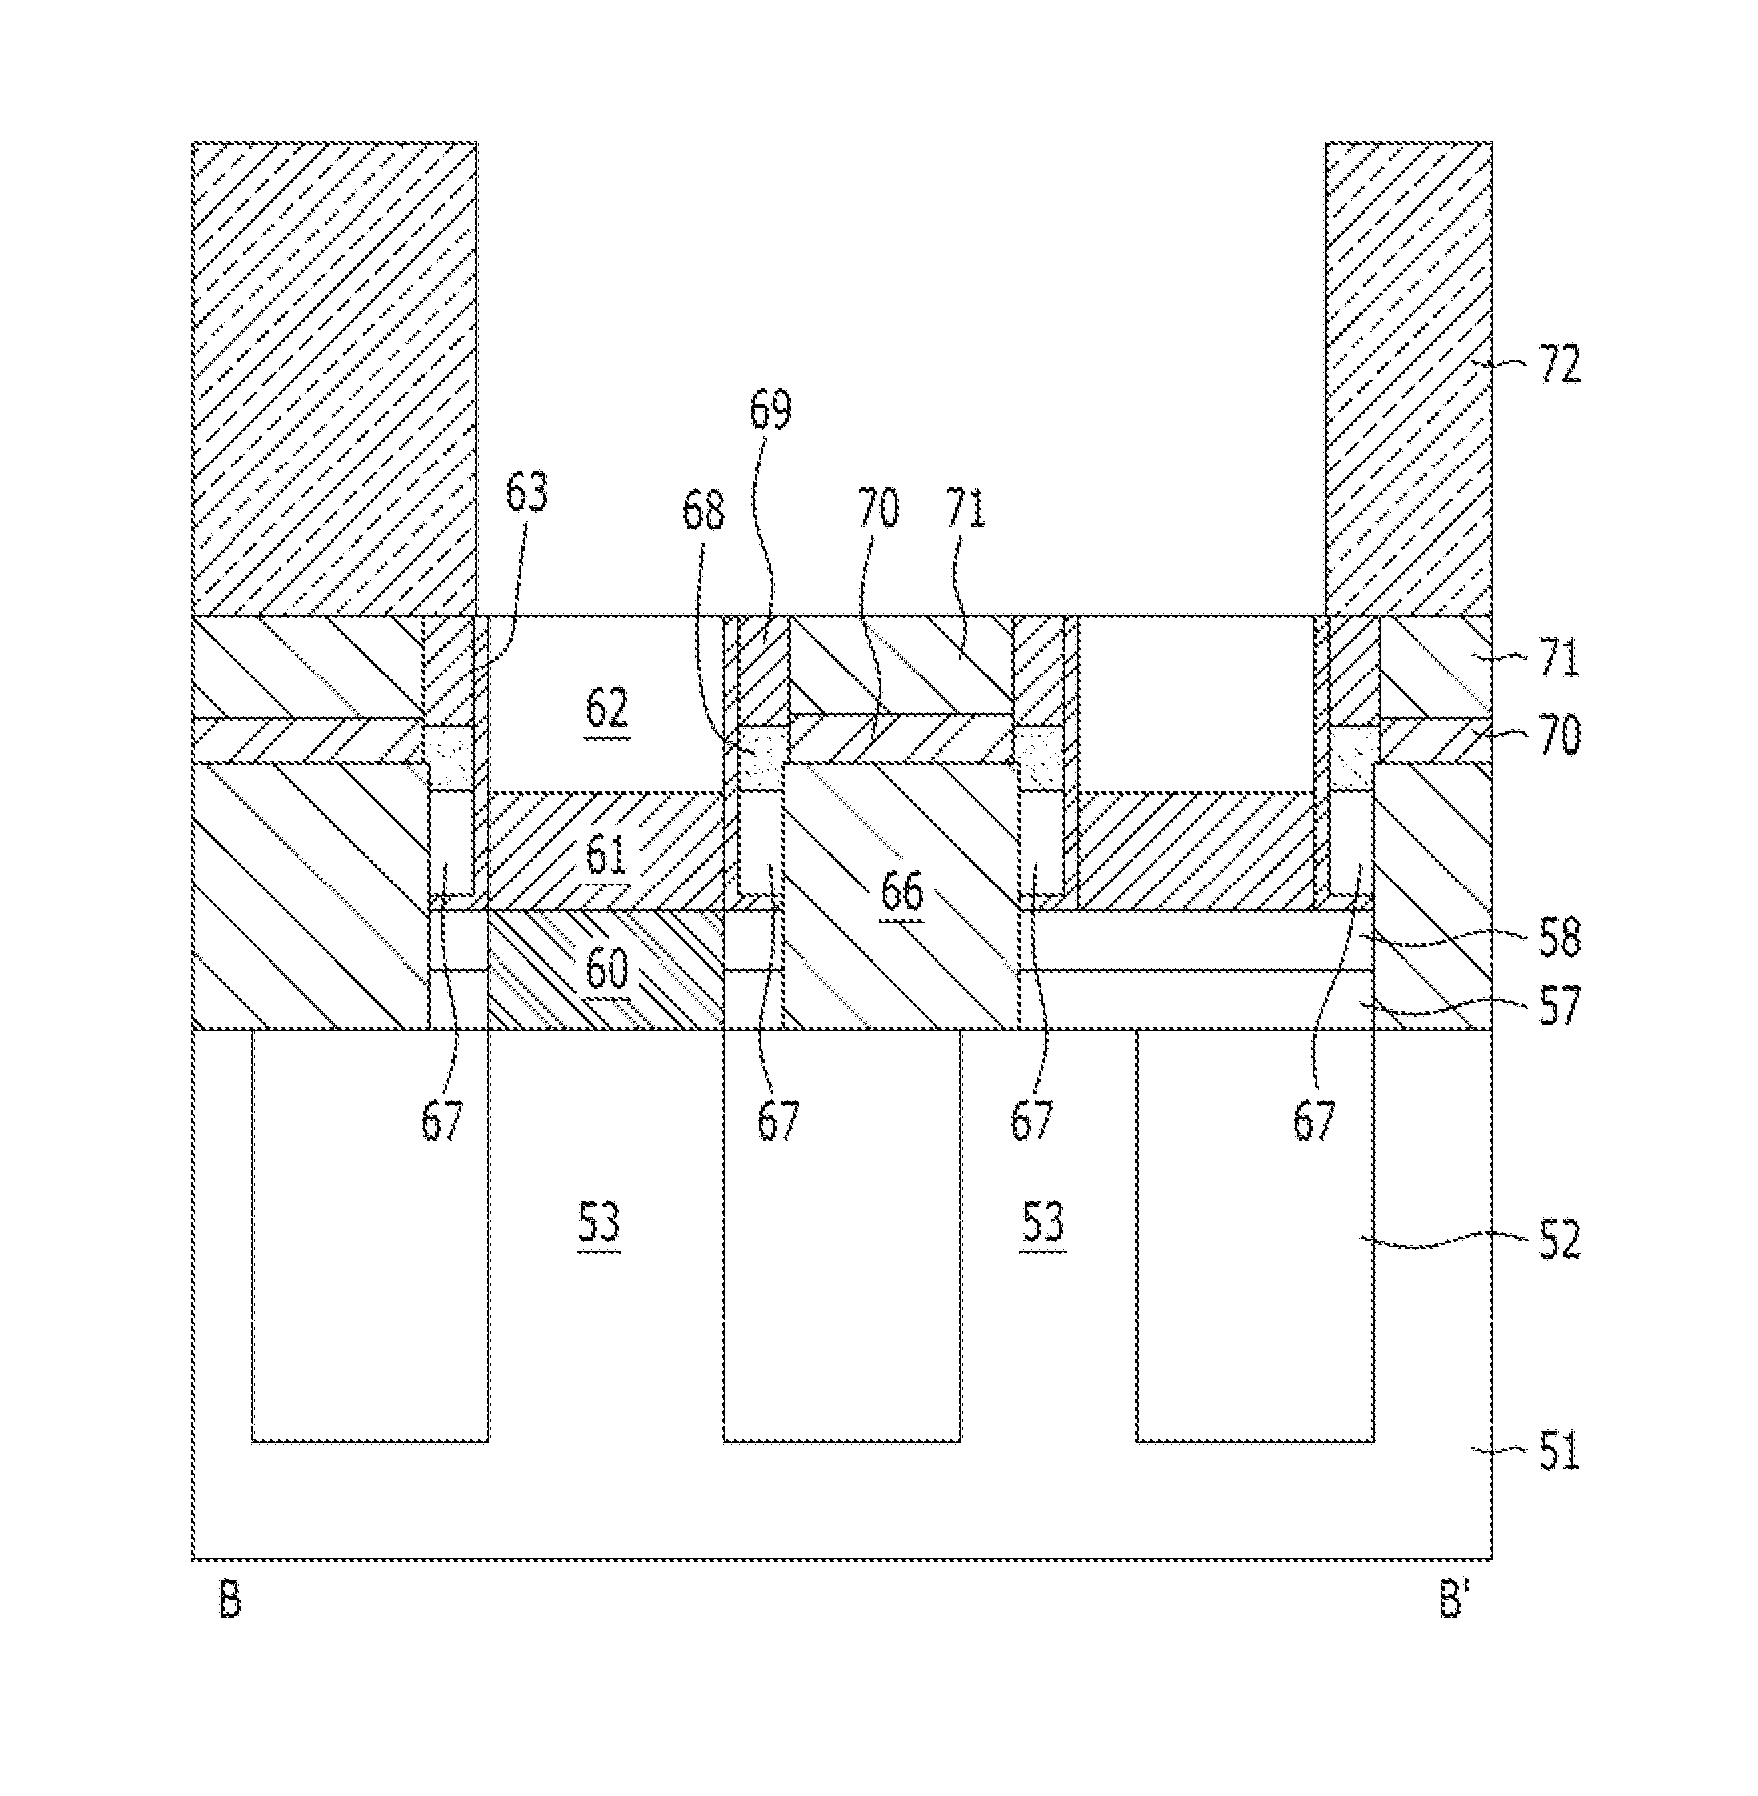 Semiconductor device including air gaps and method of fabricating the same